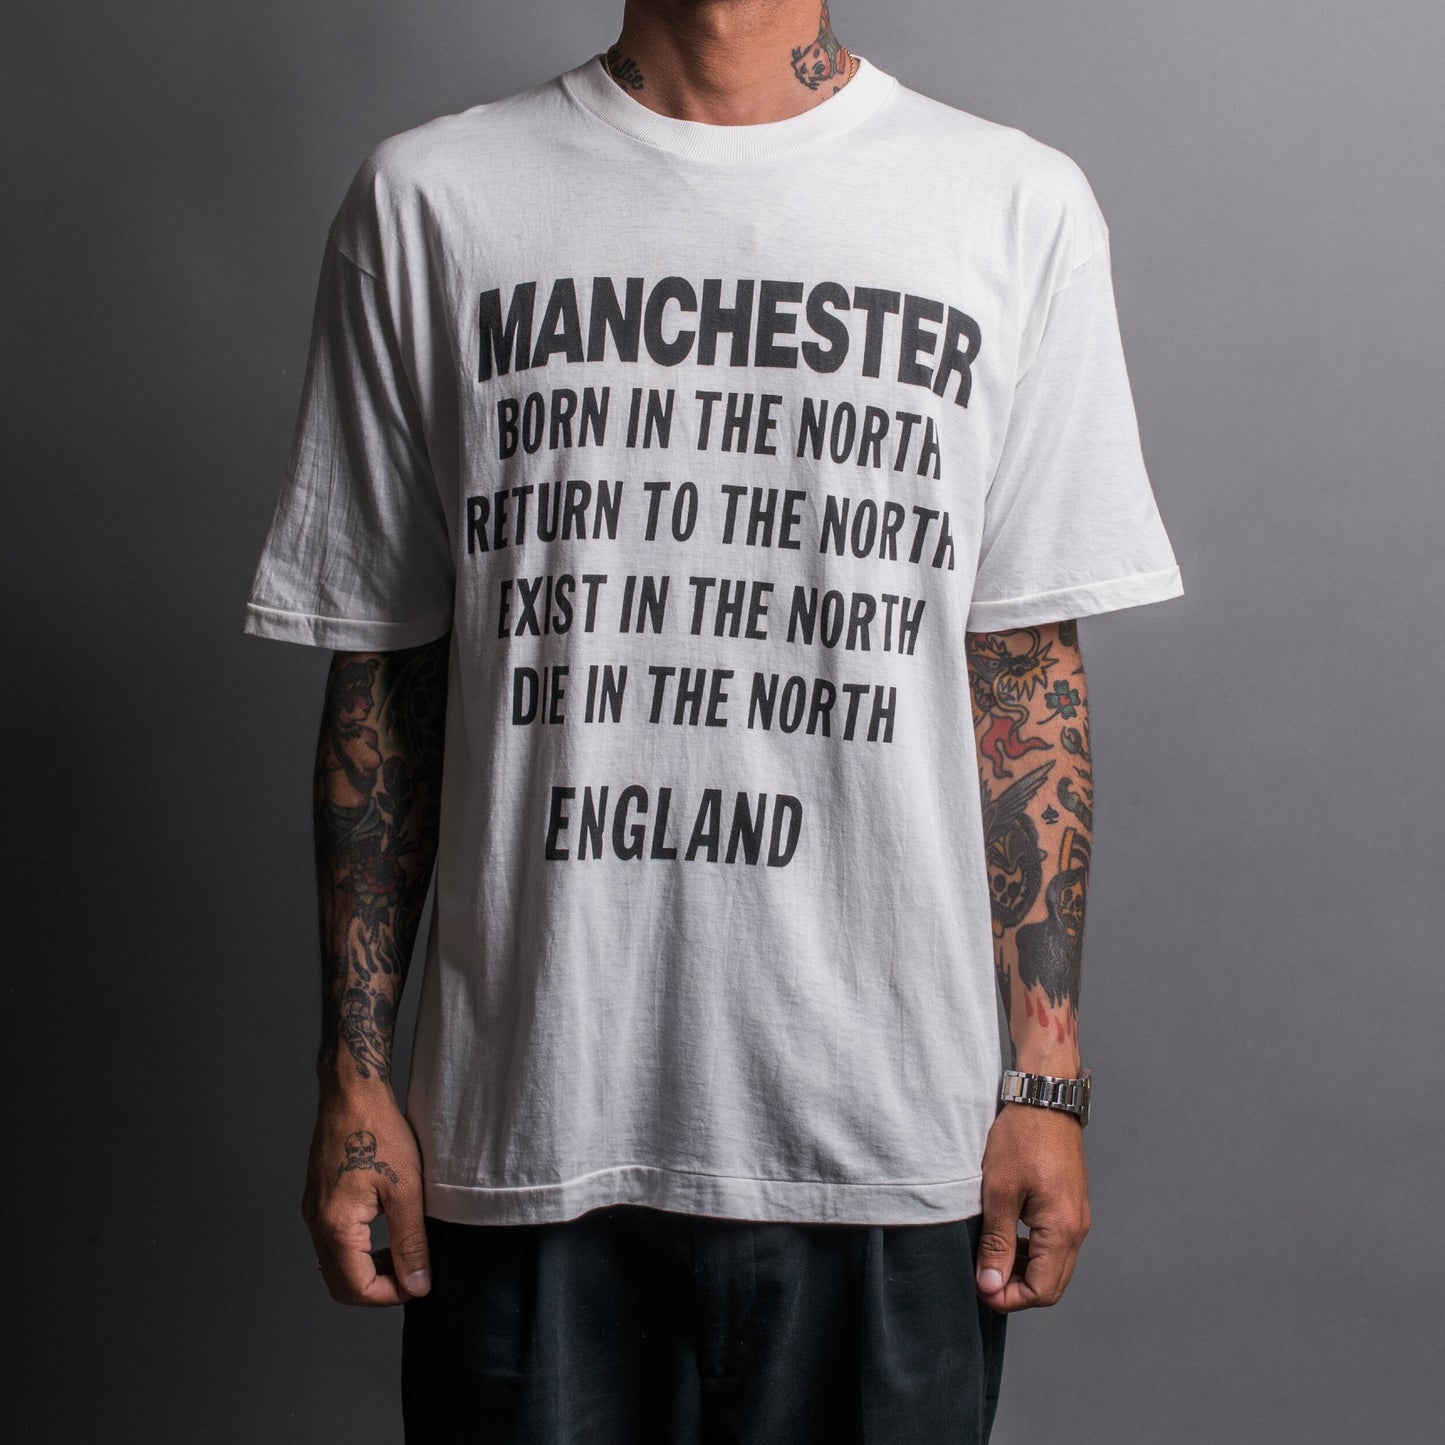 Vintage 80’s Manchester Born In The North T-Shirt